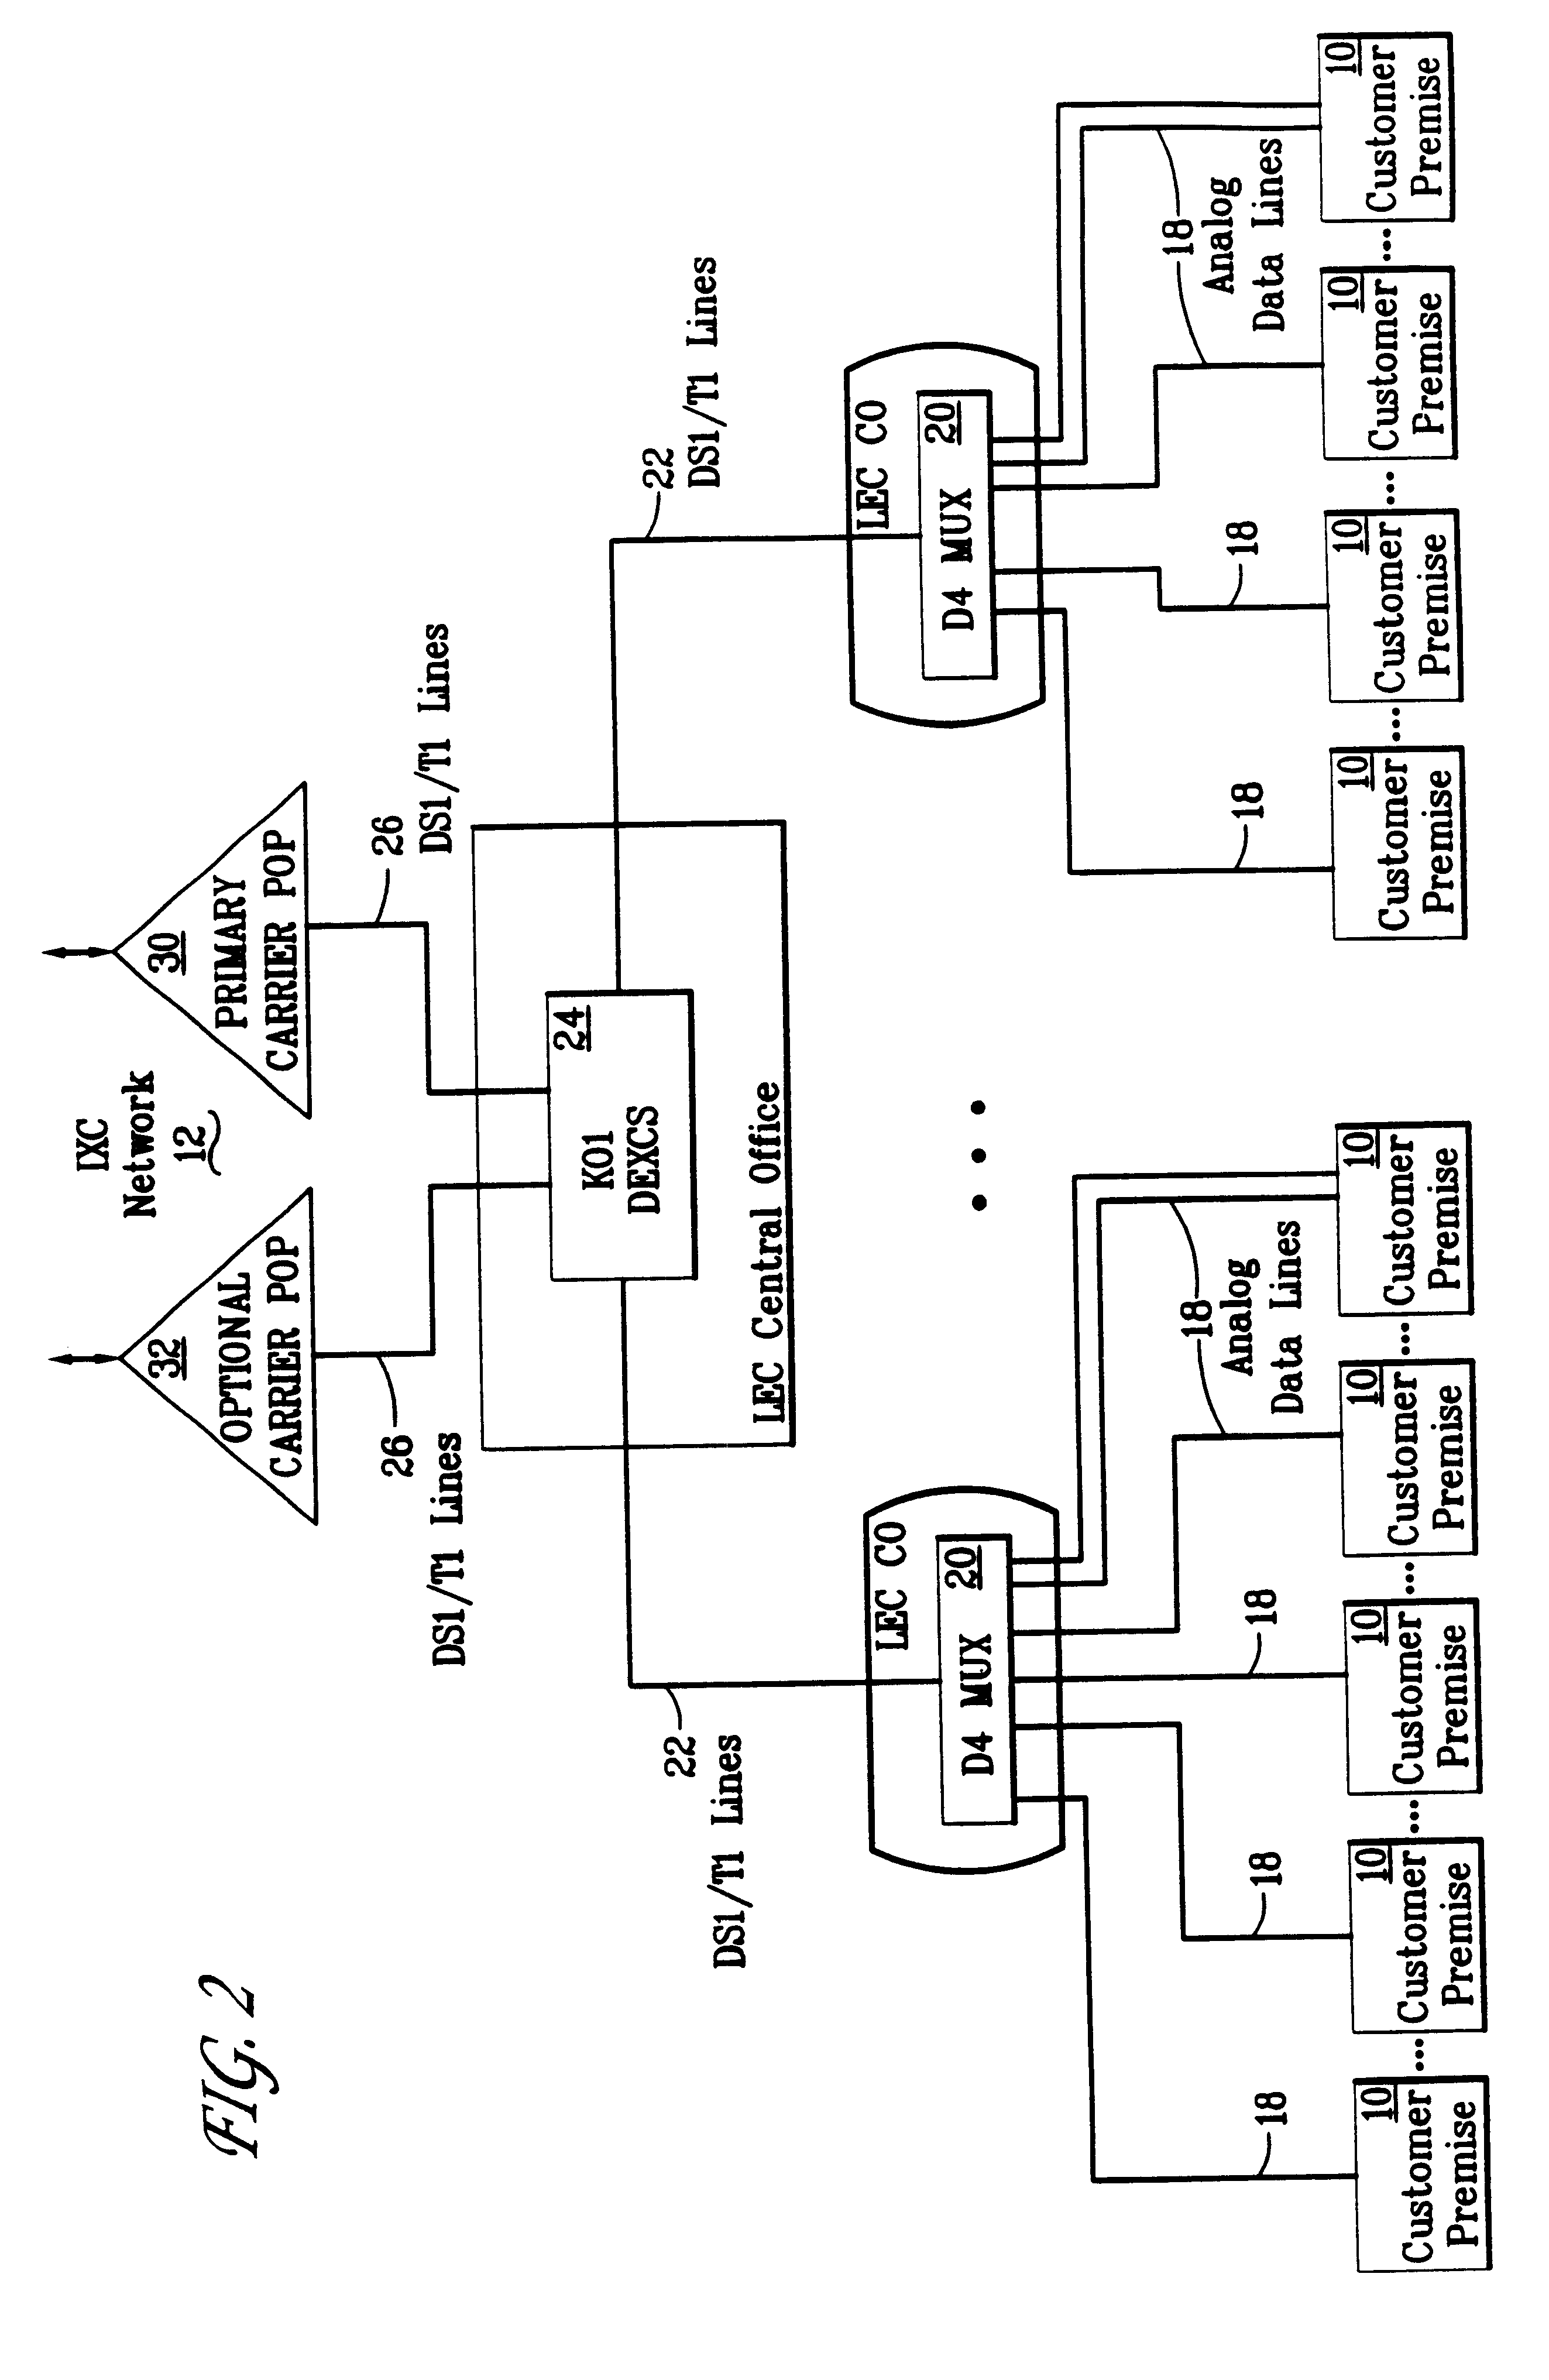 Method and apparatus for bypassing a local exchange carrier using analog in-band signaling